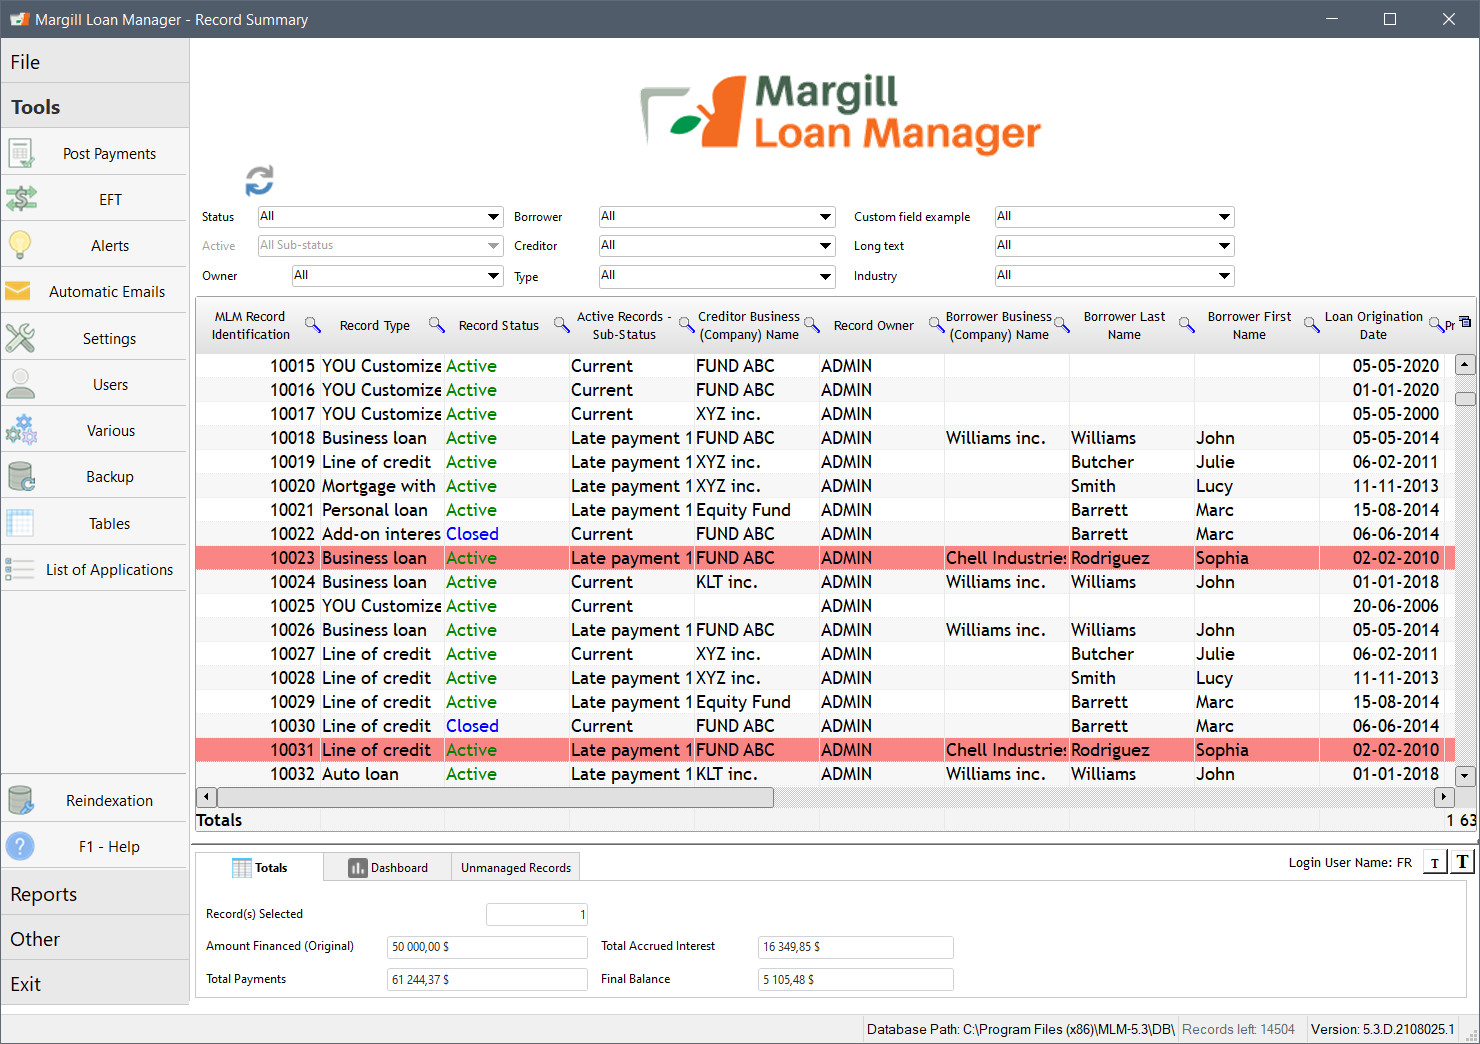 Margill Loan Manager Main Window - List of all loans: Search, Sort, Filter, Display important data, Balances at current date. A great Dashboard for a portfolio overview